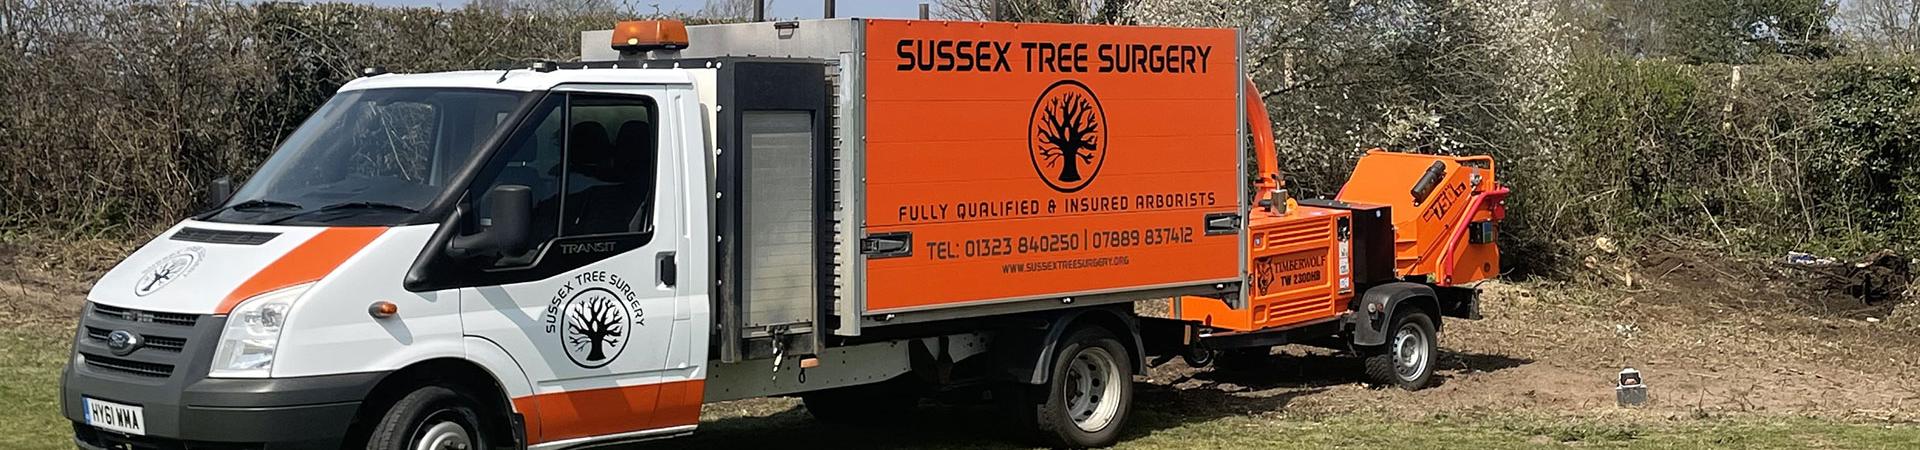 Sussex tree surgery on site carrying out tree works